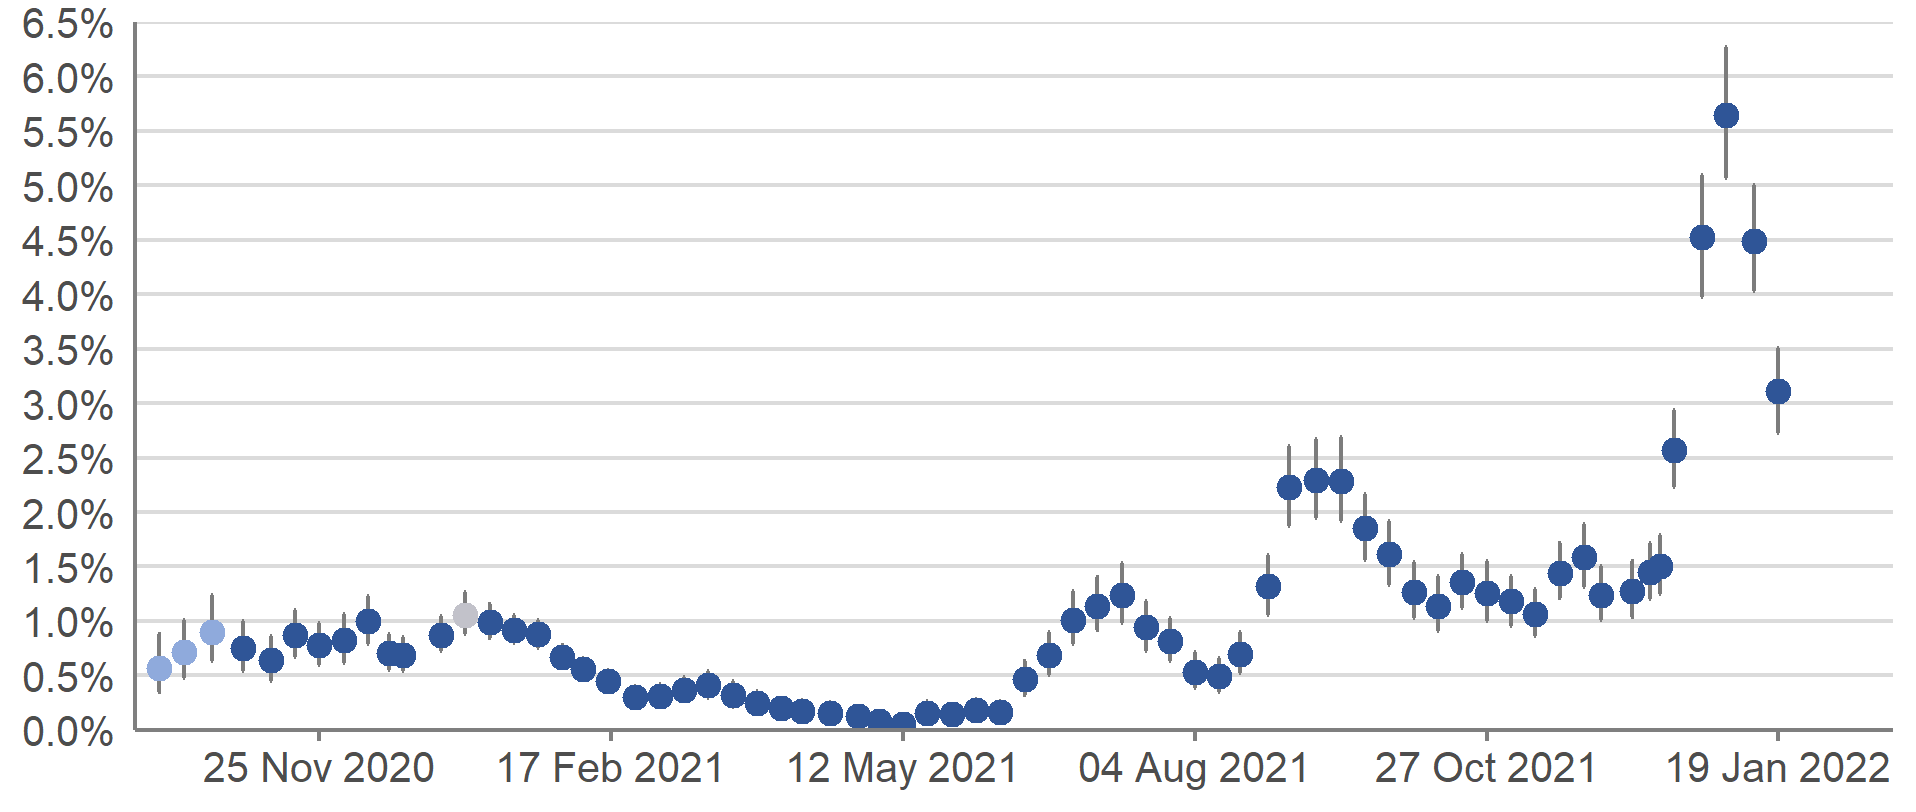 Estimates for the percentage of people testing positive for COVID-19 in Scotland increased between early-December and early-January, and reached their highest peak since the start of the pandemic in the week 1 to 7 January 2022. In the most recent week, the percentage of people testing positive continued to decrease.